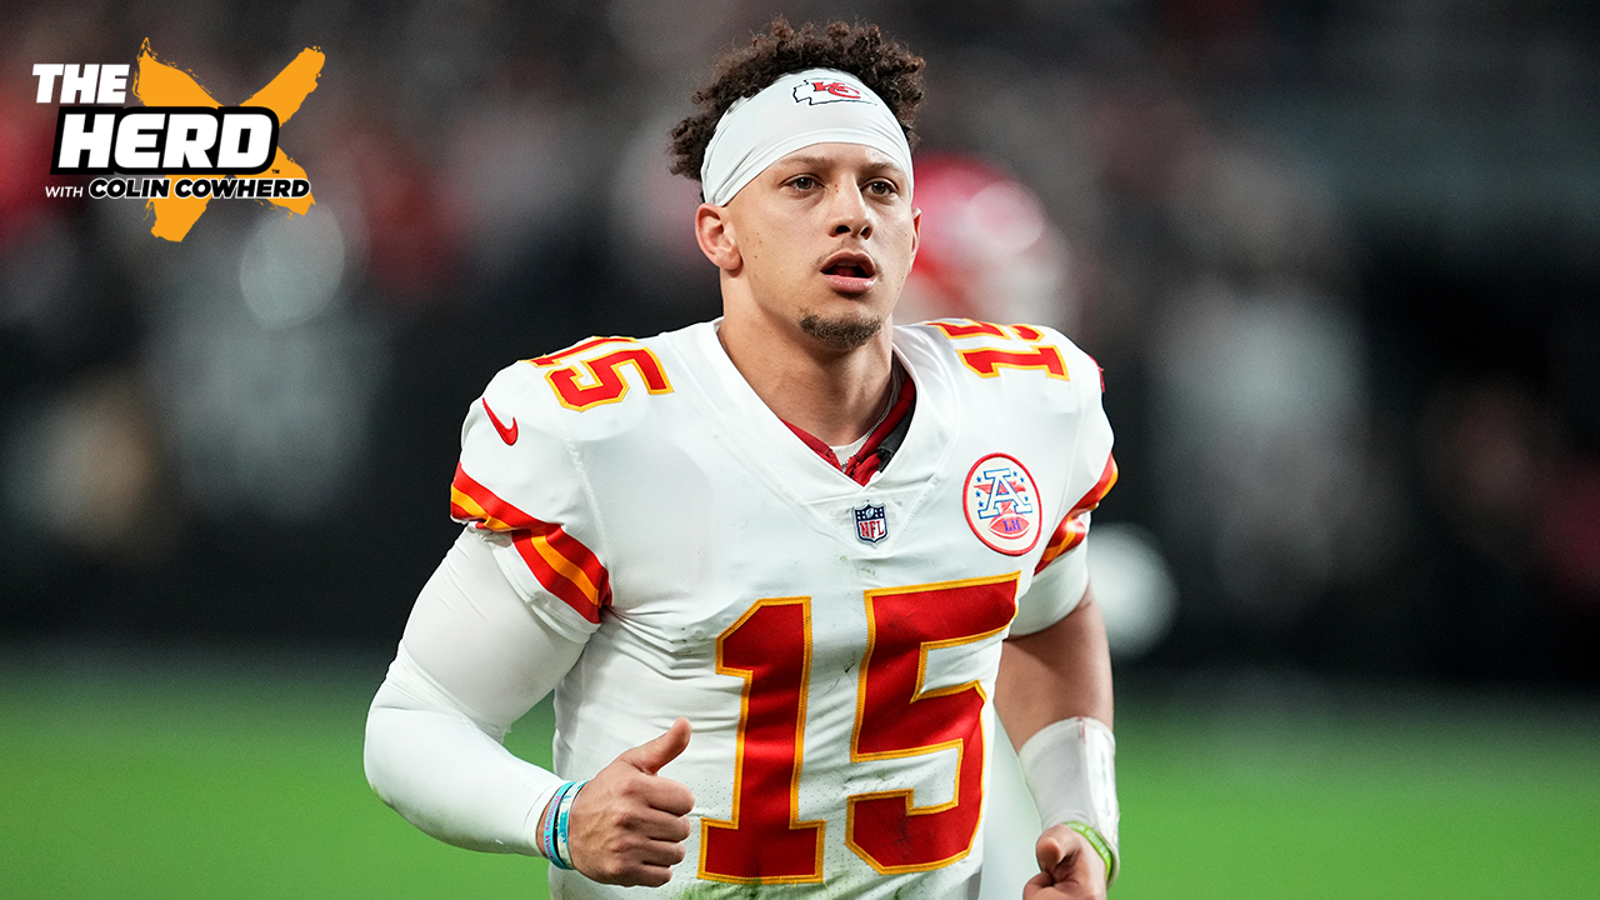 Is Patrick Mahomes the clear favorite for the 2022 NFL MVP award?